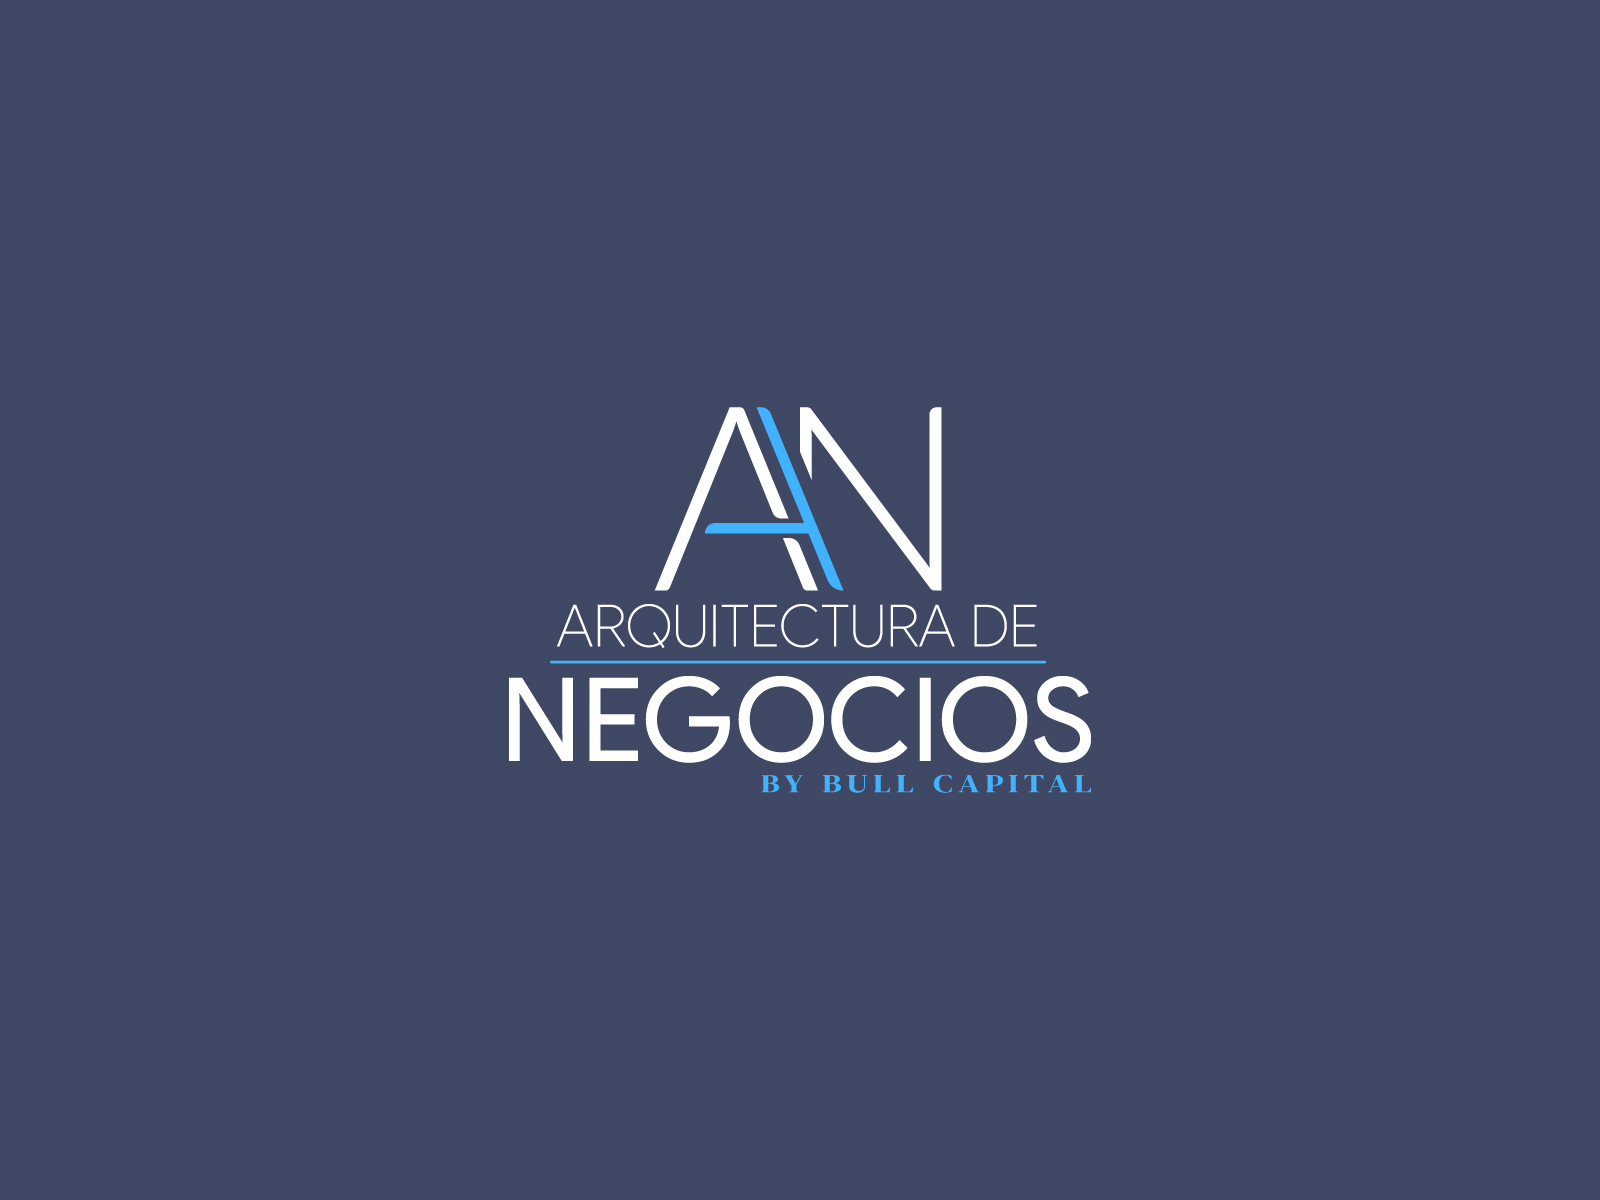 Arquitectura de Negocios by Bull Capital by Fidel Hdz on Dribbble